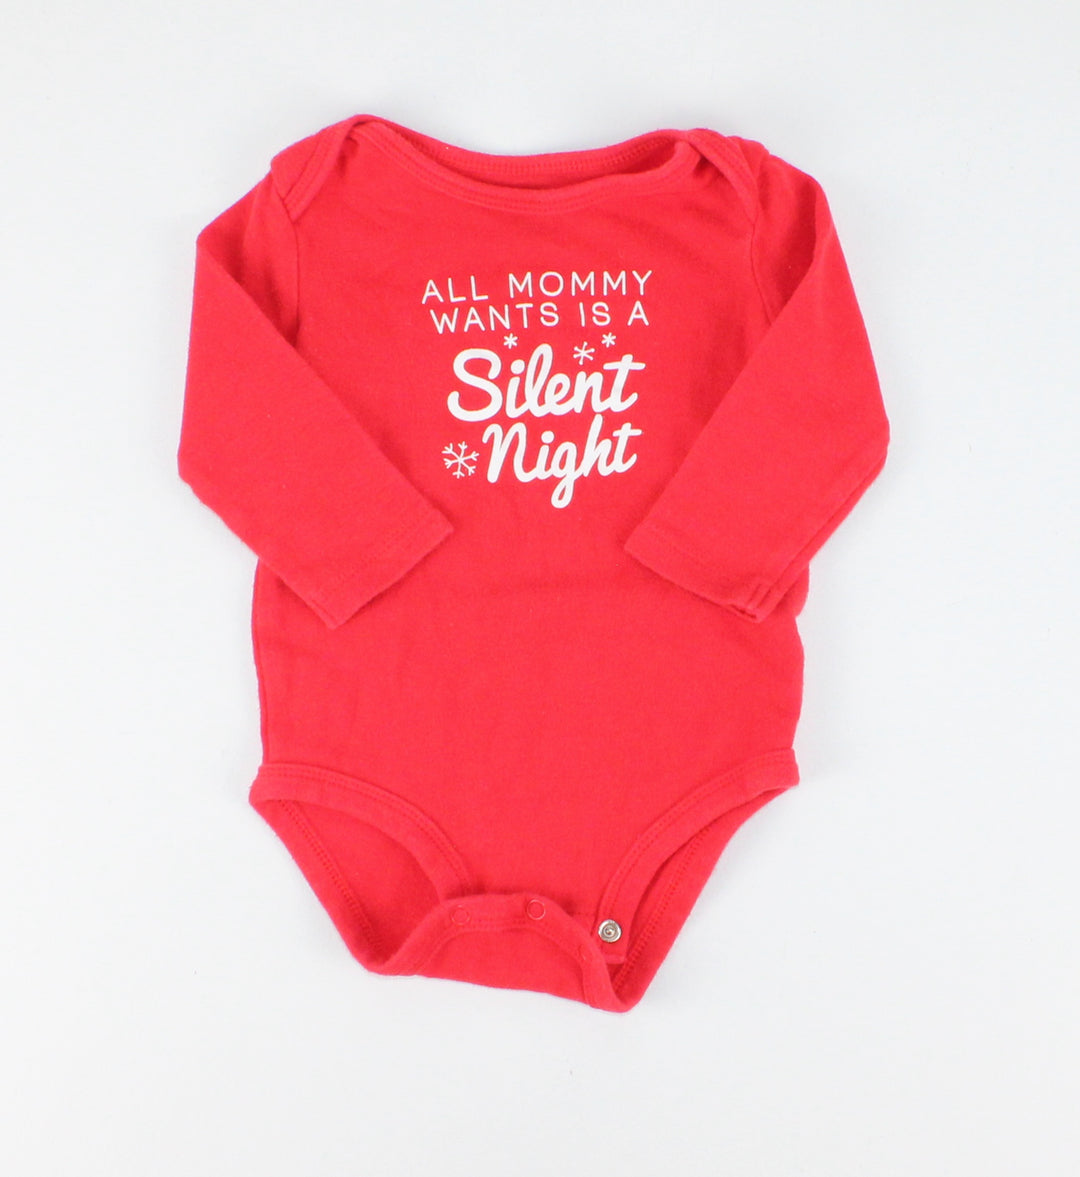 CARTERS ALL MOMMY WANTS IS A SILENT NIGHT ONESIE 9M EUC